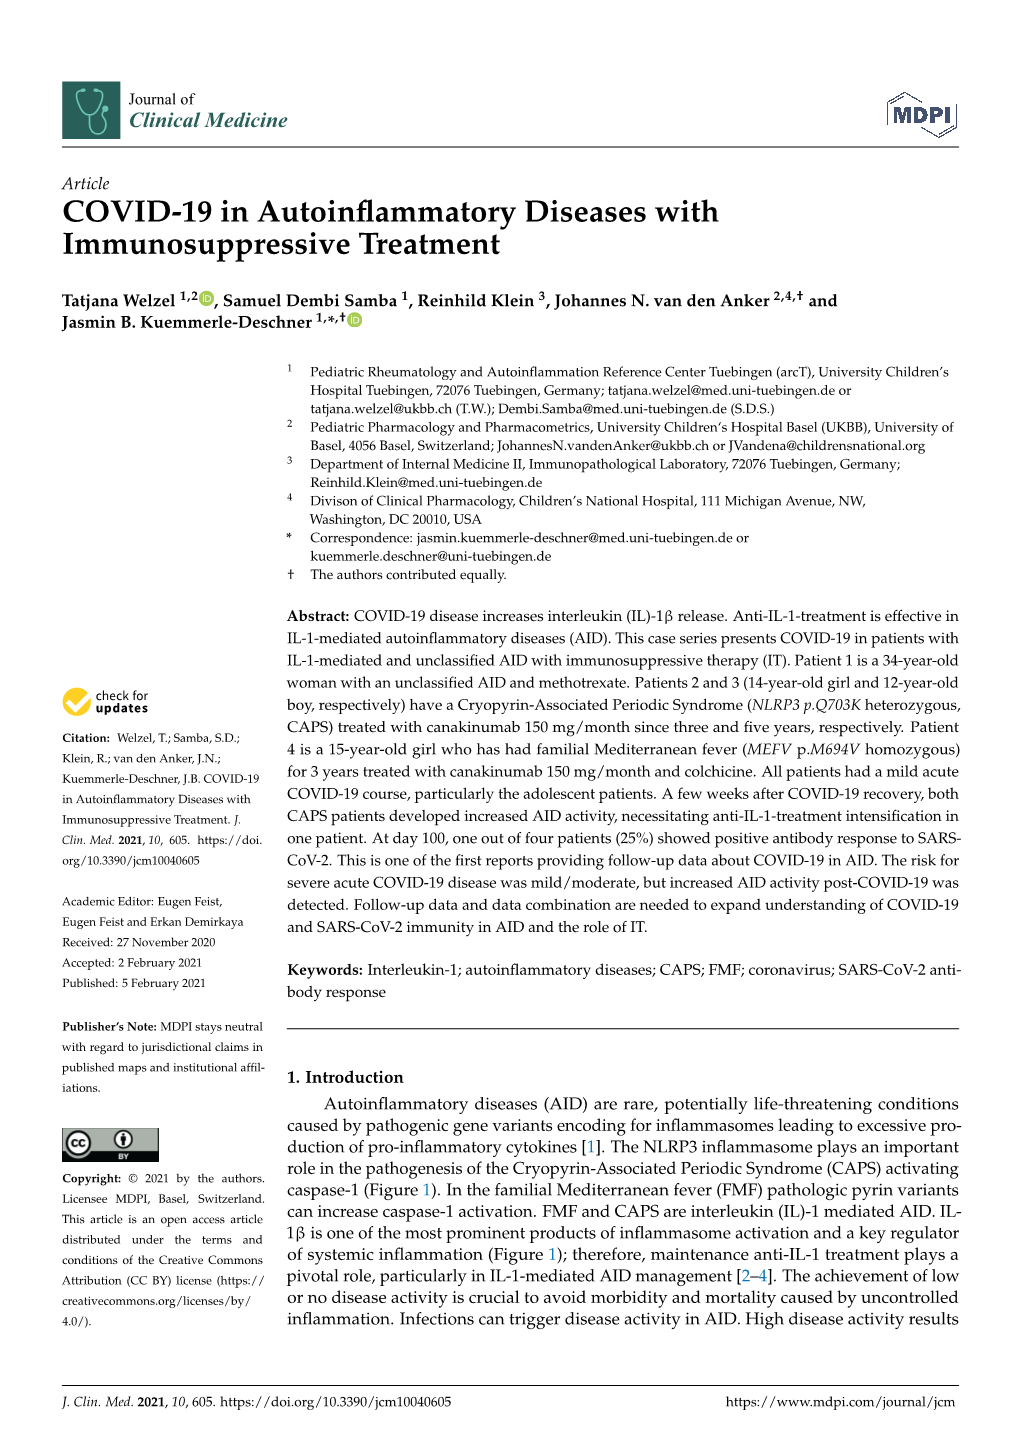 COVID-19 in Autoinflammatory Diseases with Immunosuppressive